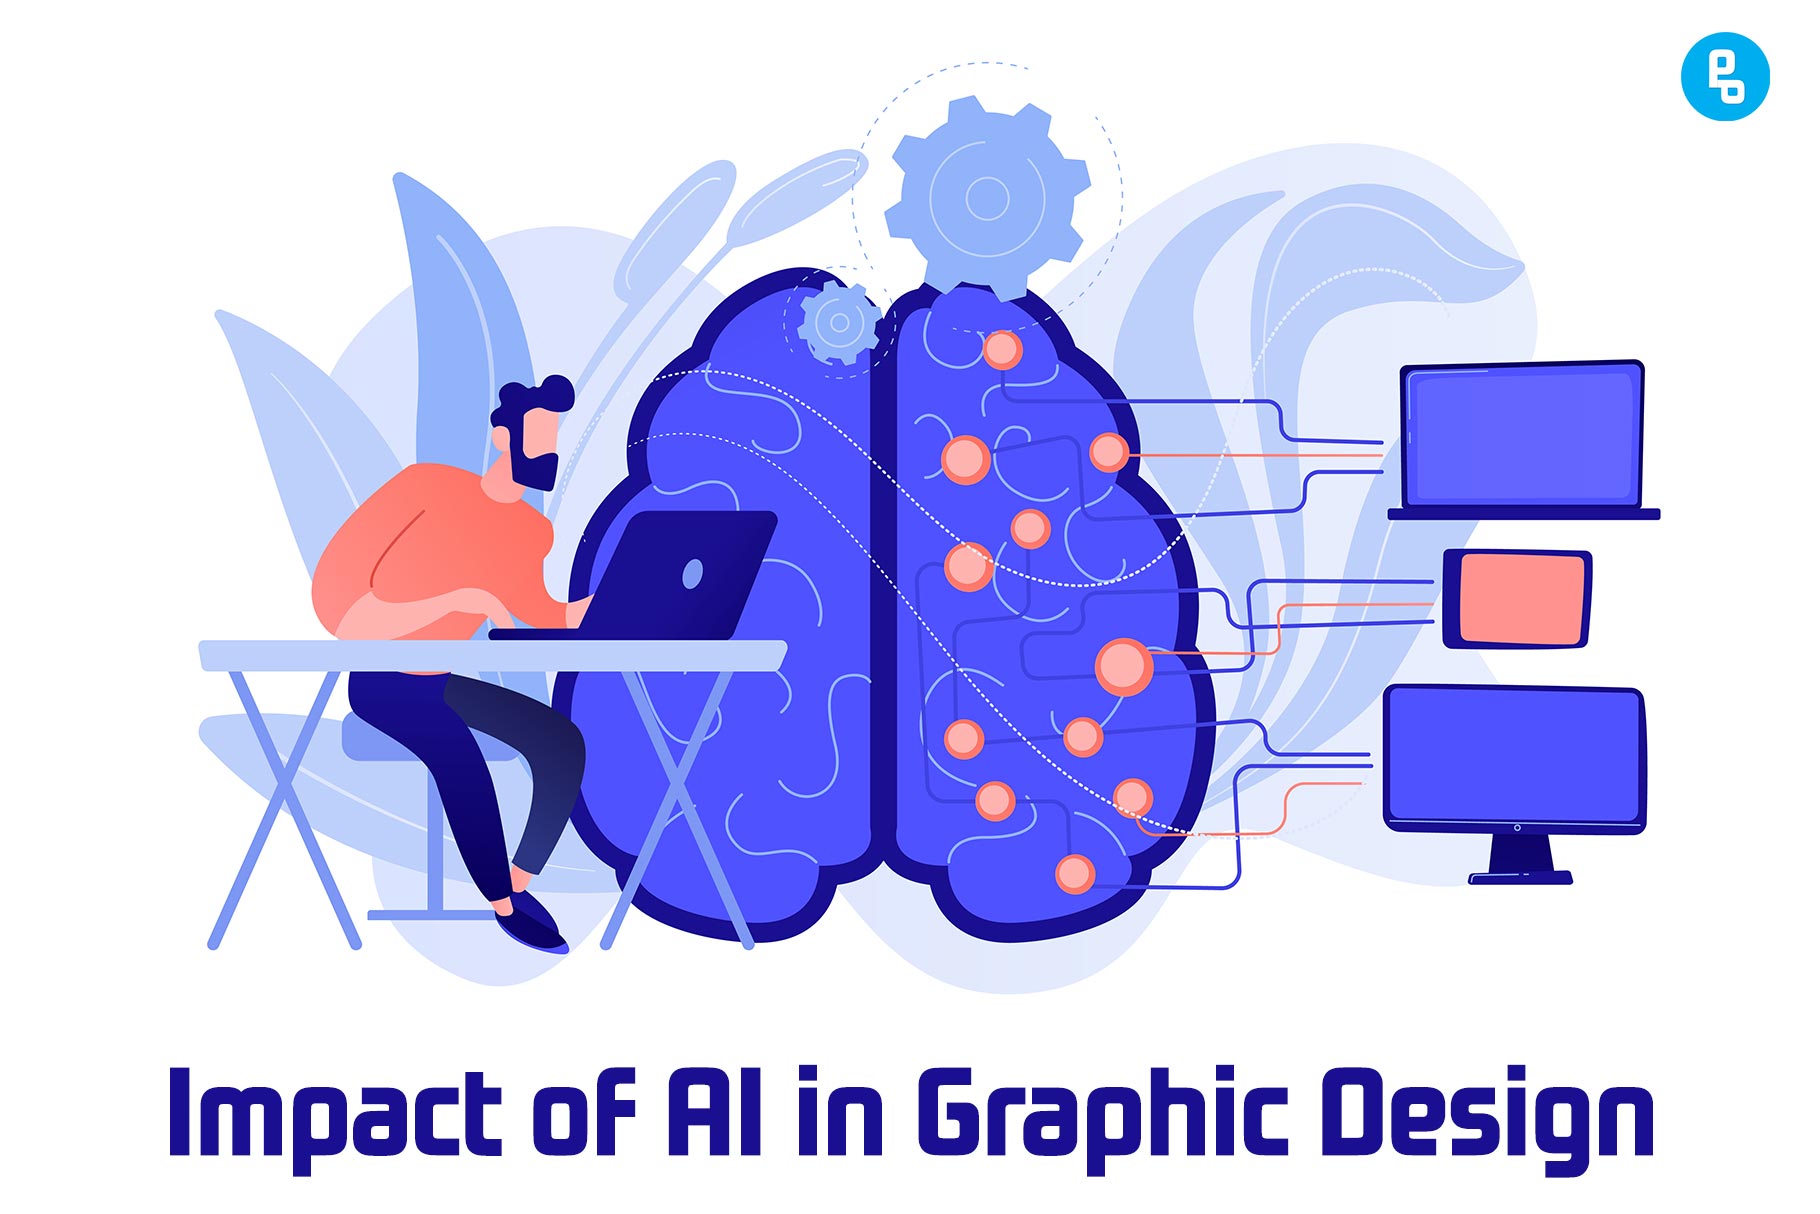 In this article we will discuss how AI can improve your work as a graphic designer (and maybe even save some time), but also what risks lie ahead for you if you choose to continue working without it.